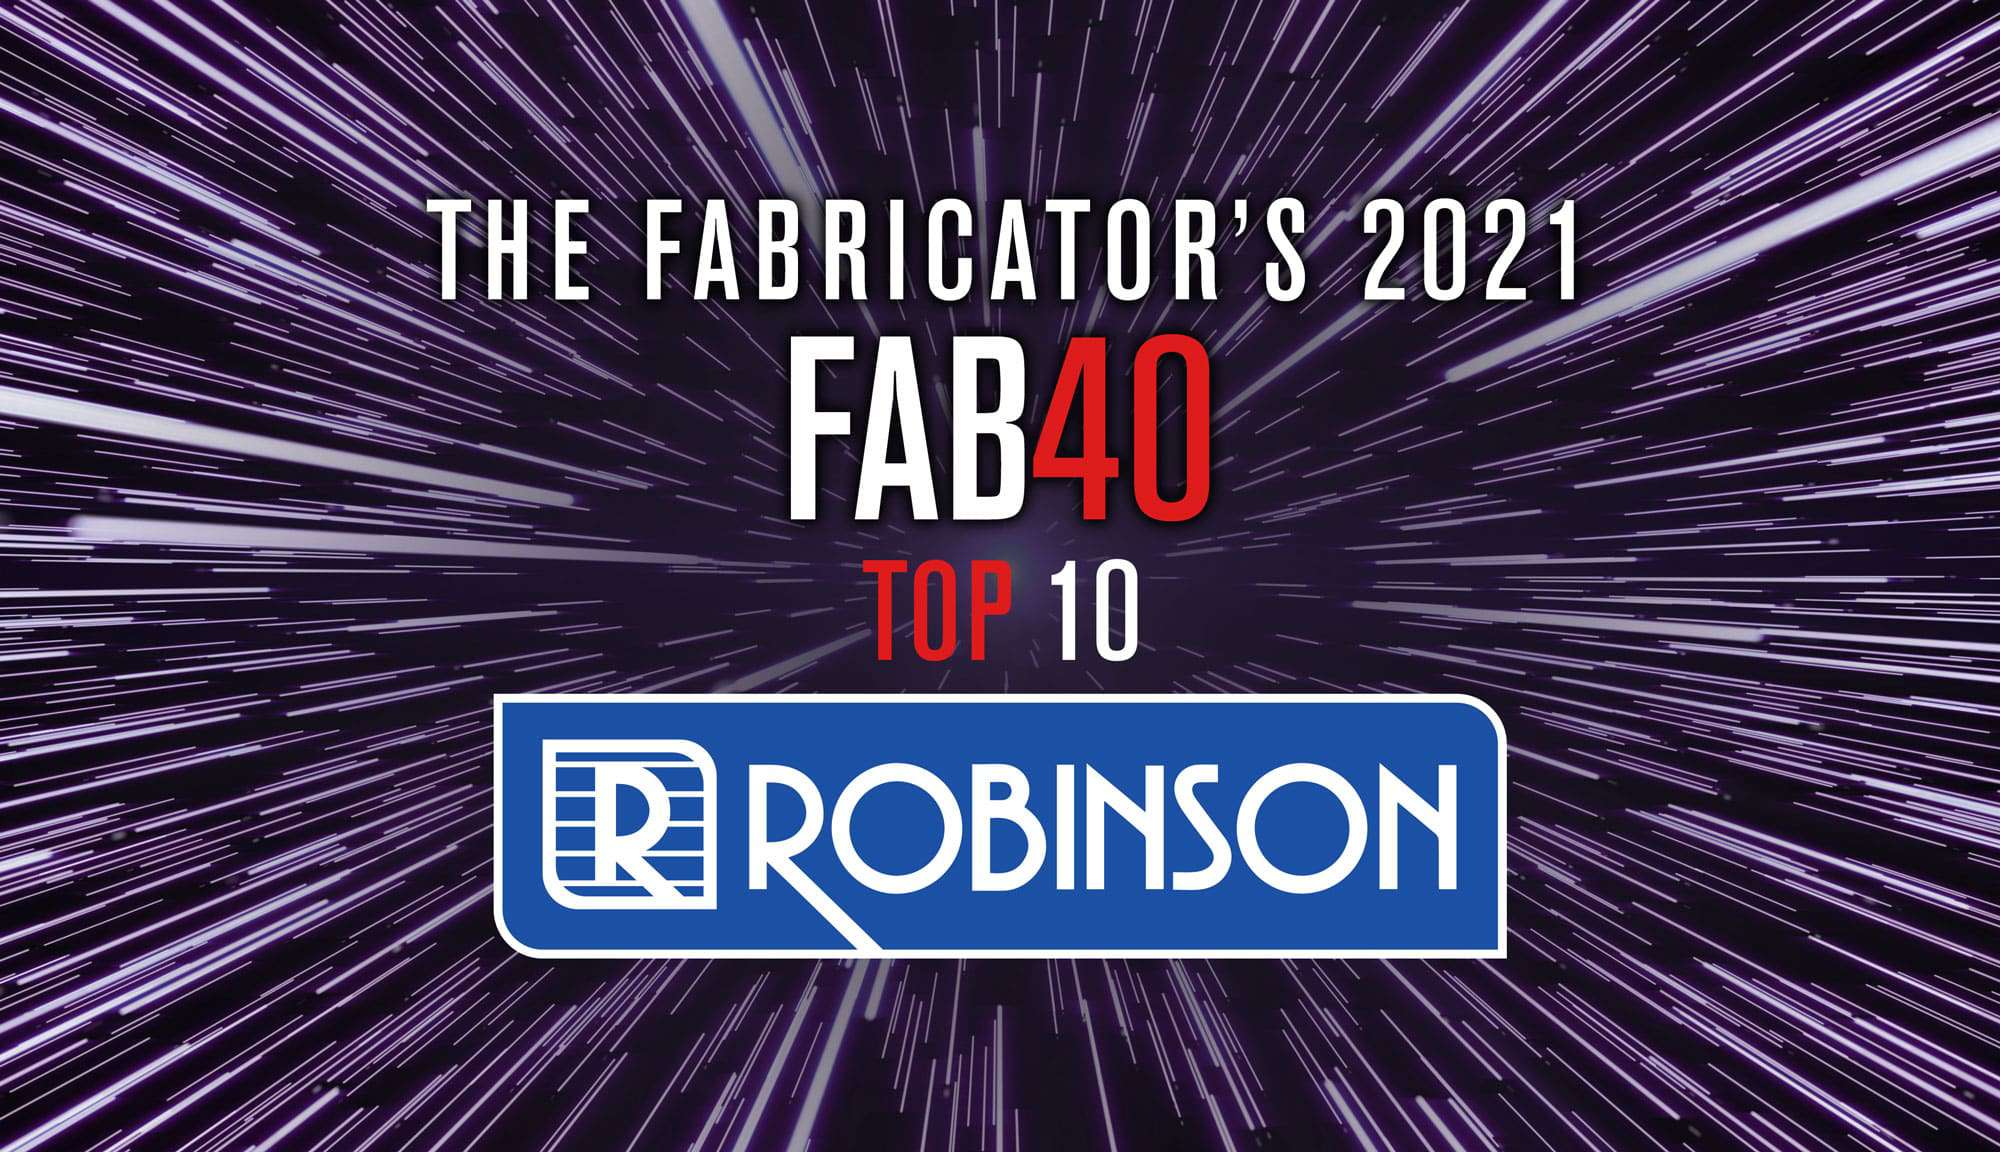 Robinson moves into the top 10 on “The Fabricator” FAB 40 list